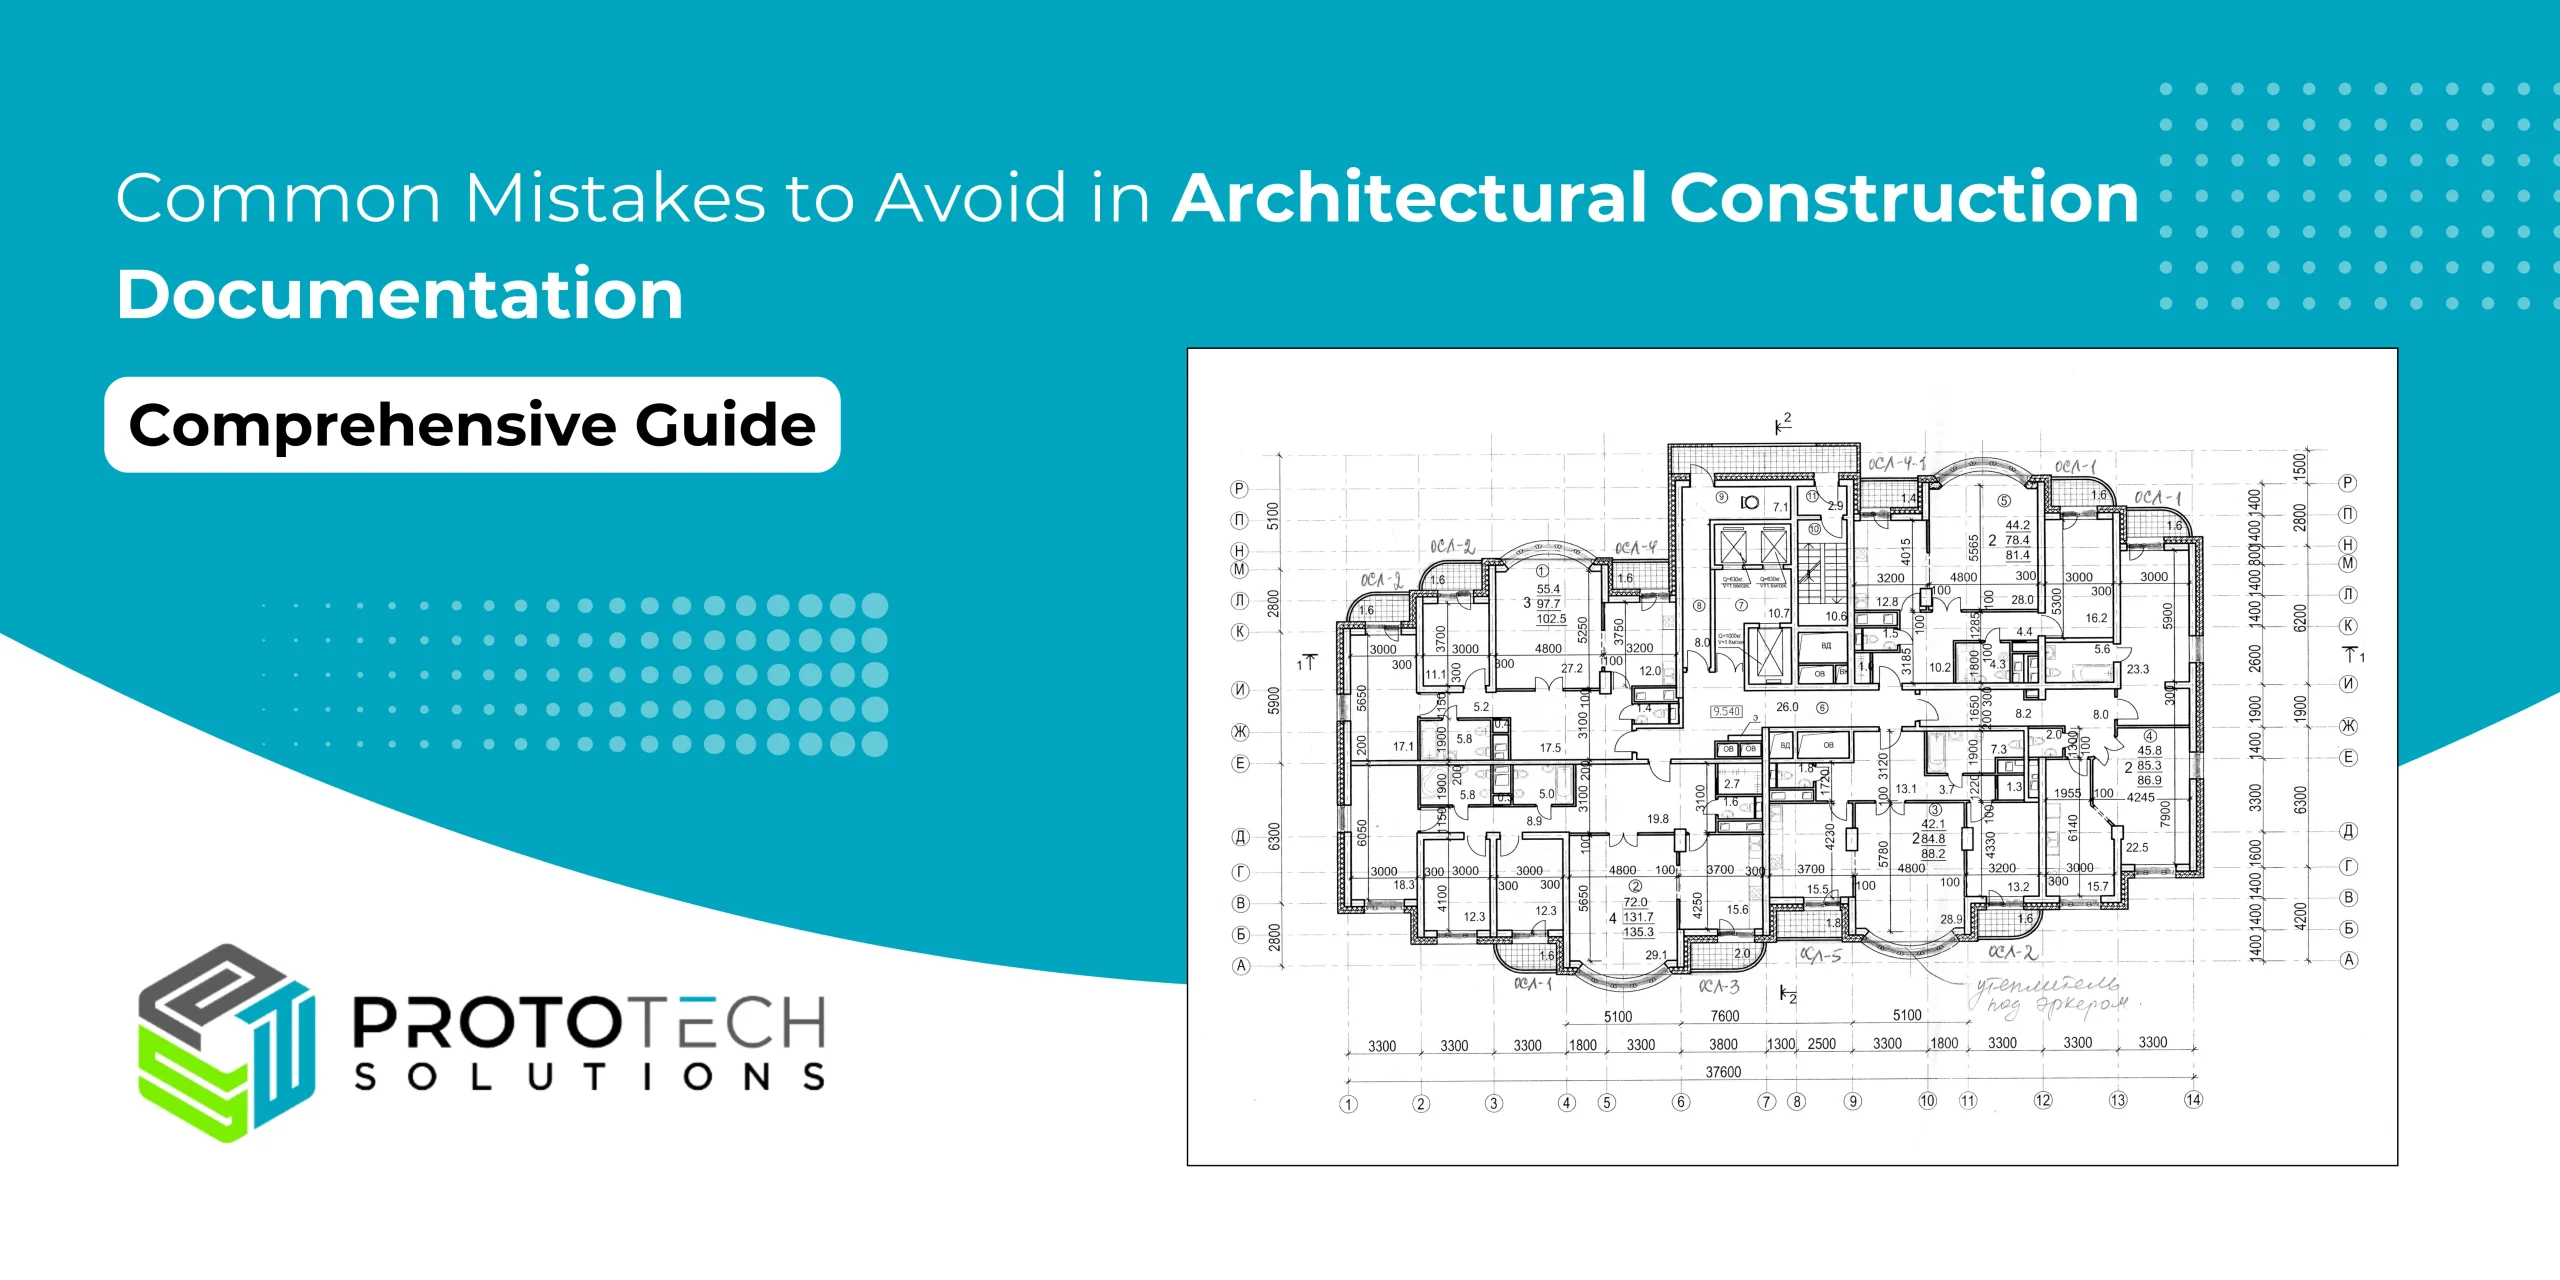 Common Mistakes to Avoid in Architectural Construction Documentation